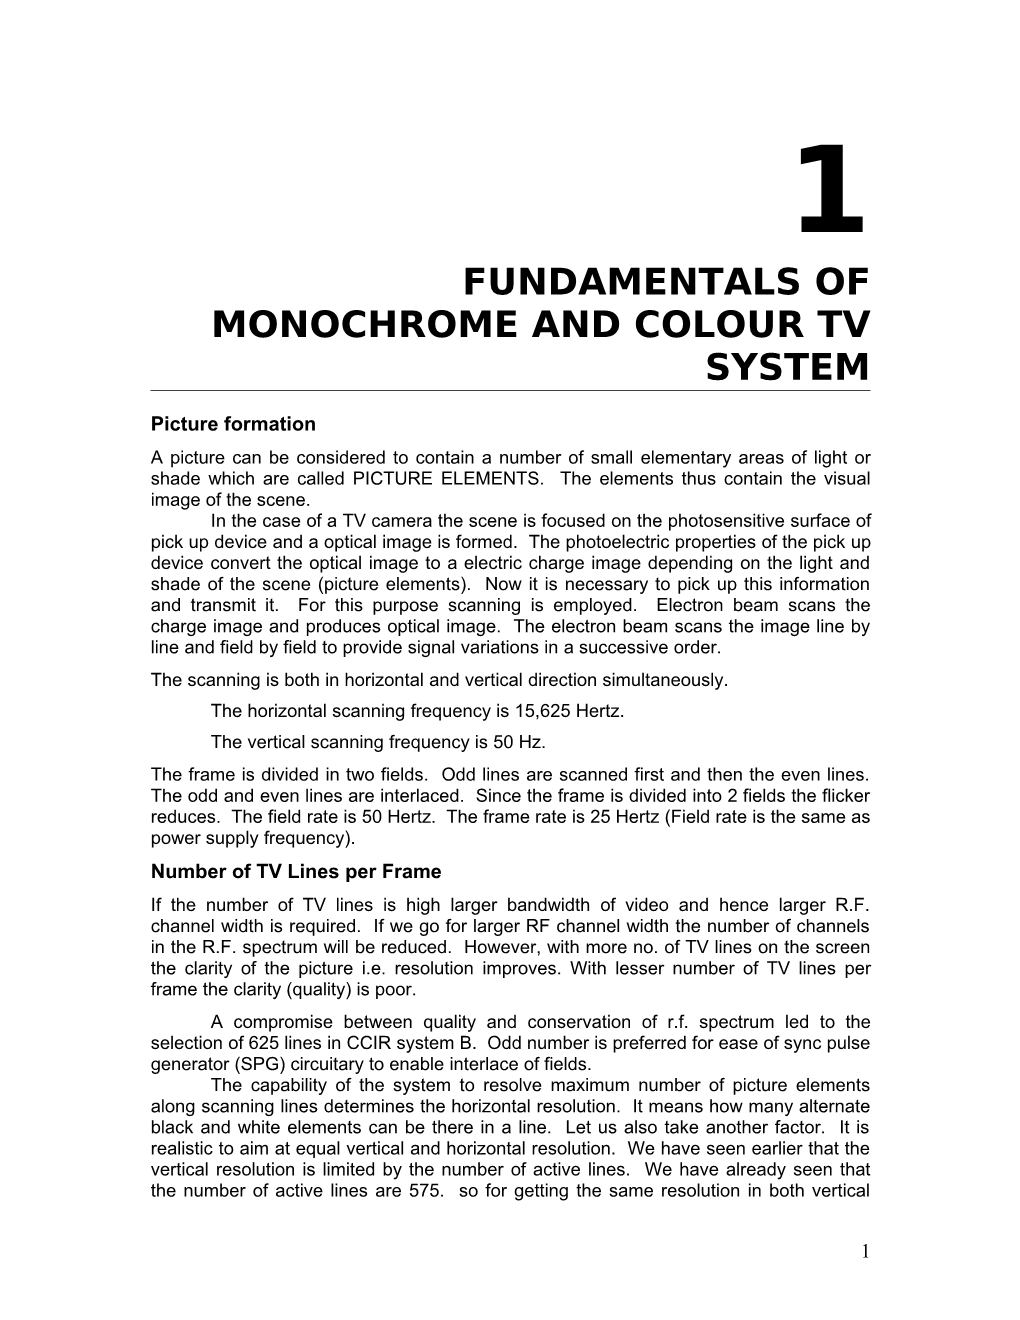 Fundamentals of Monochrome and Colour Tv System